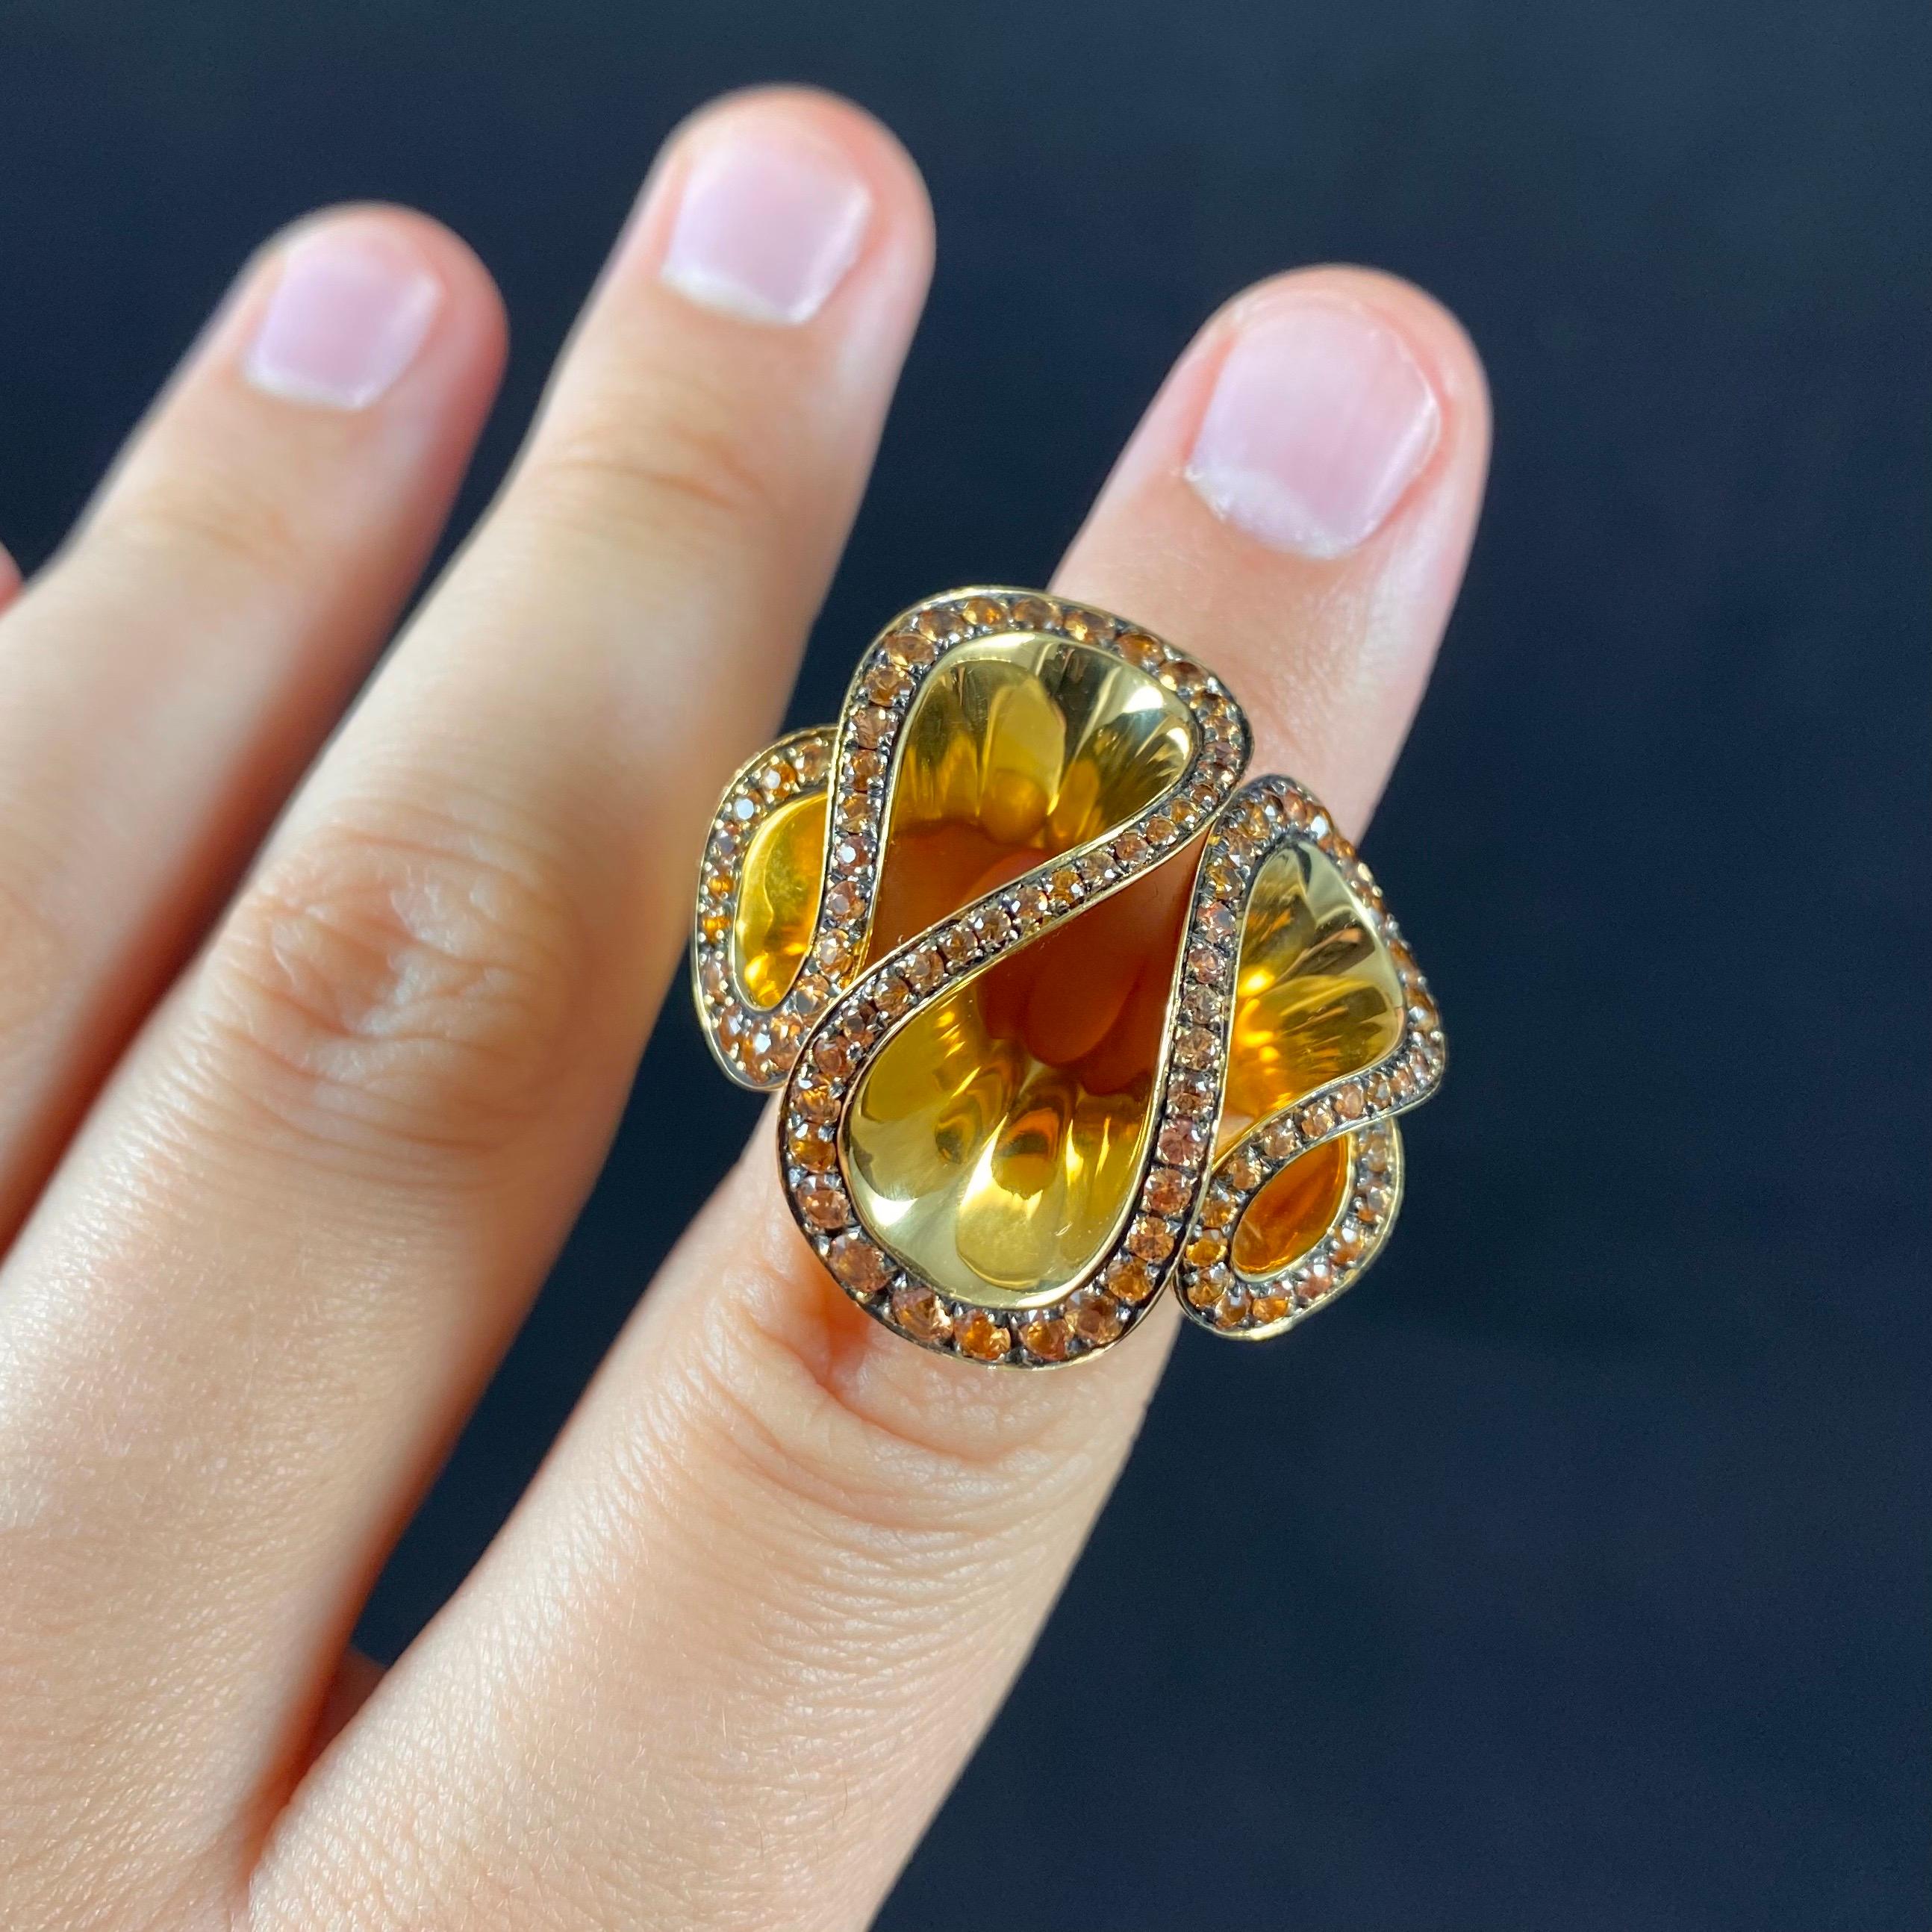 de GRISOGONO Zingana Round Yellow Sapphire Abstract Cocktail Ring Yellow Gold For Sale 2